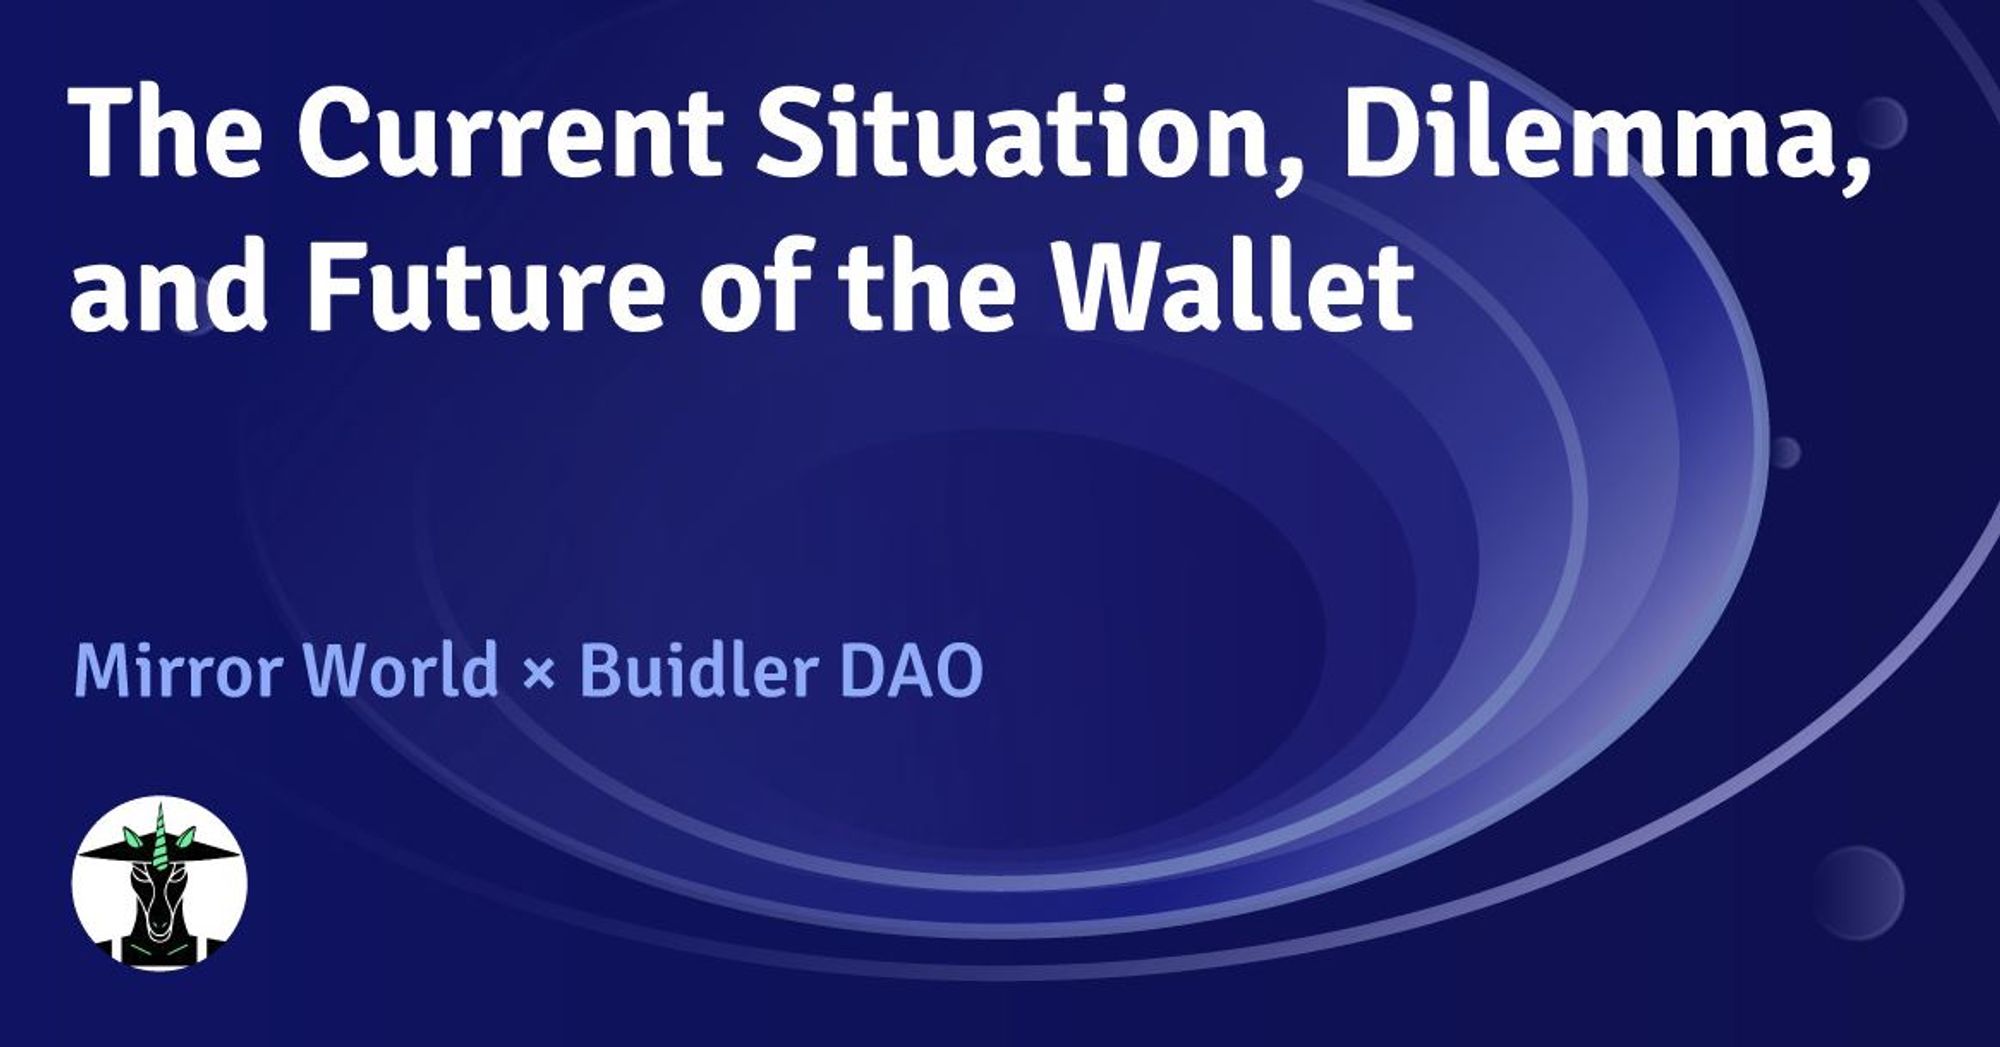 The Current Situation, Dilemma, and Future of Crypto Wallets